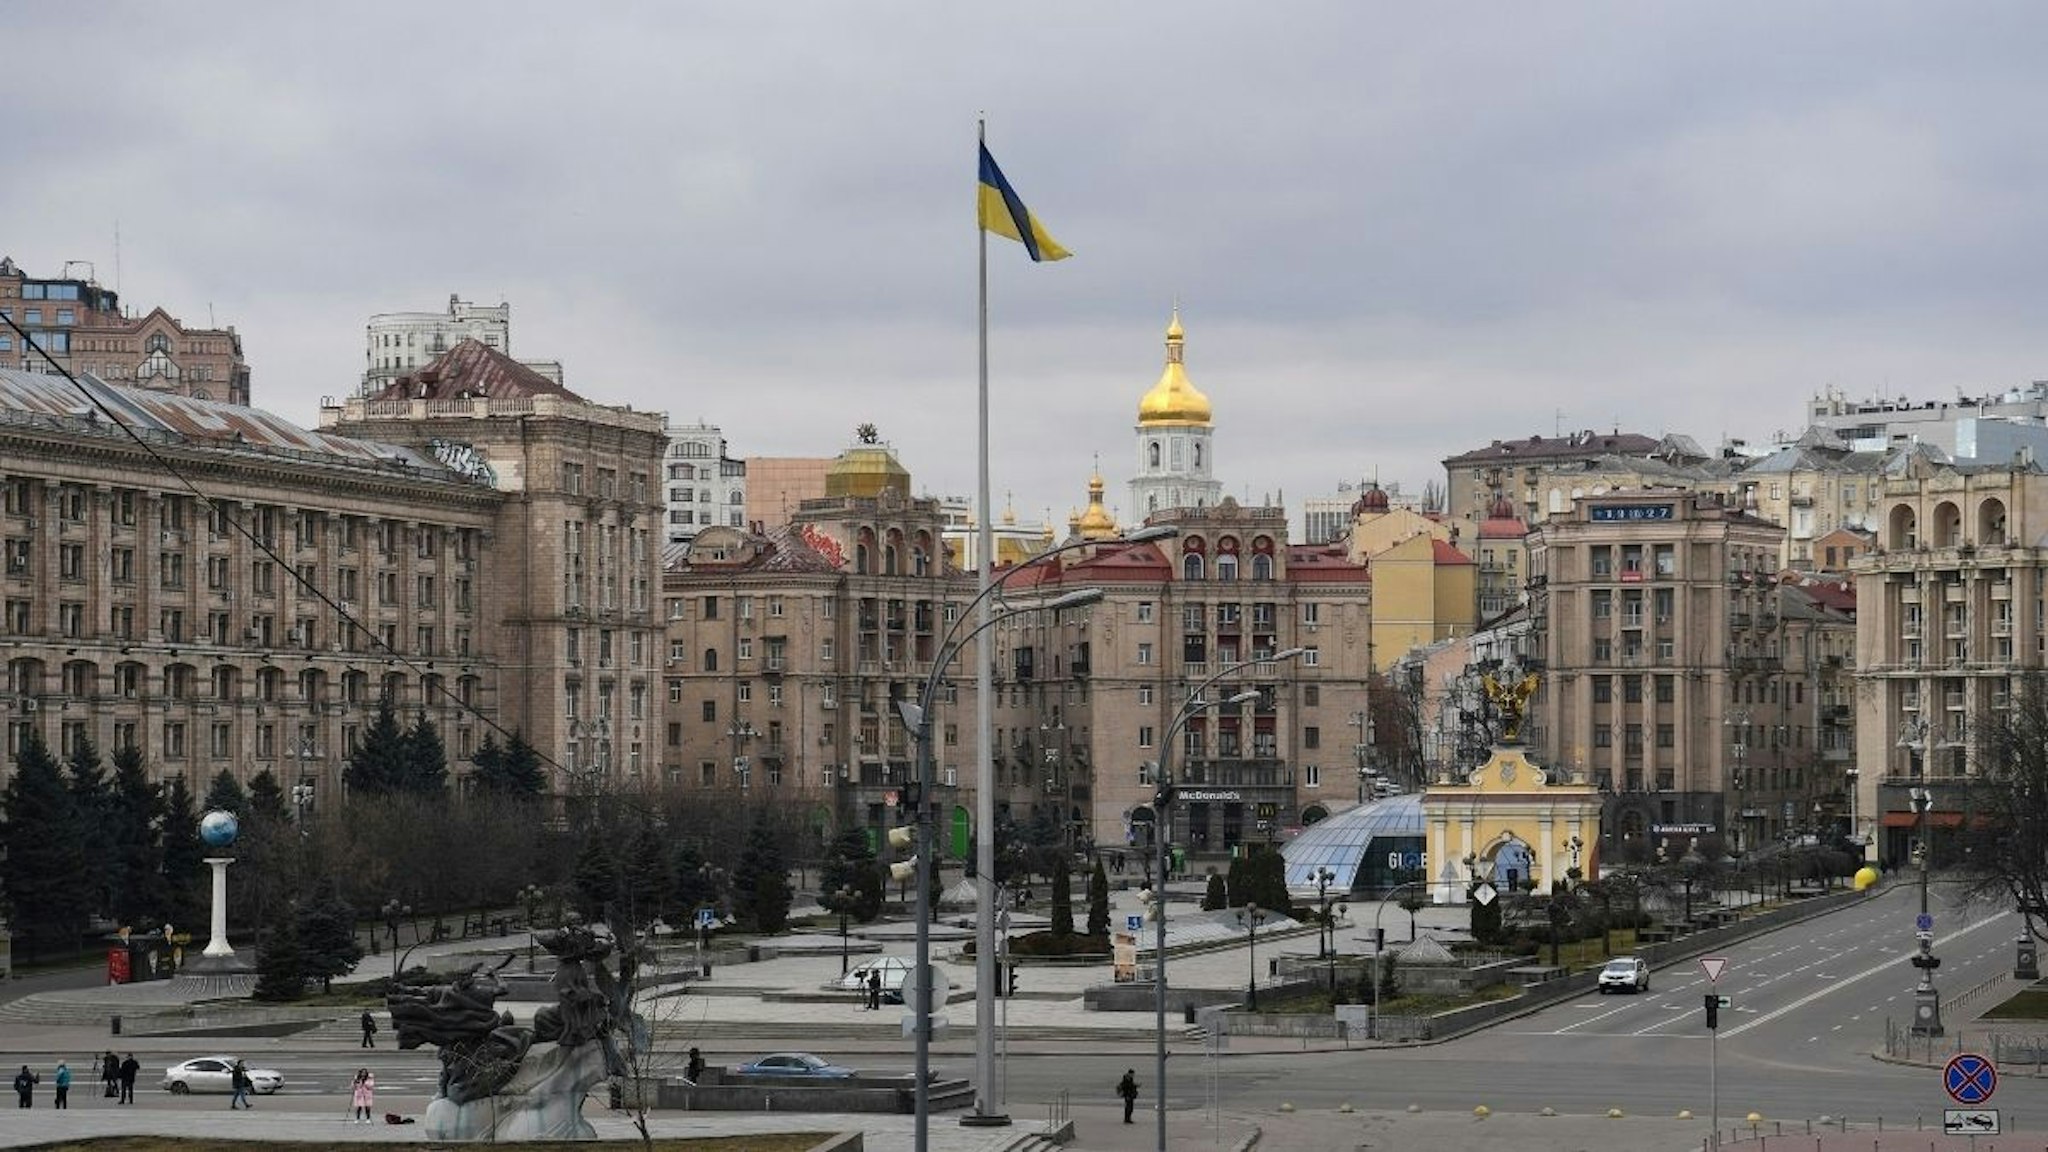 A picture shows the almost deserted center of the Ukrainian capital of Kyiv on February 25, 2022.